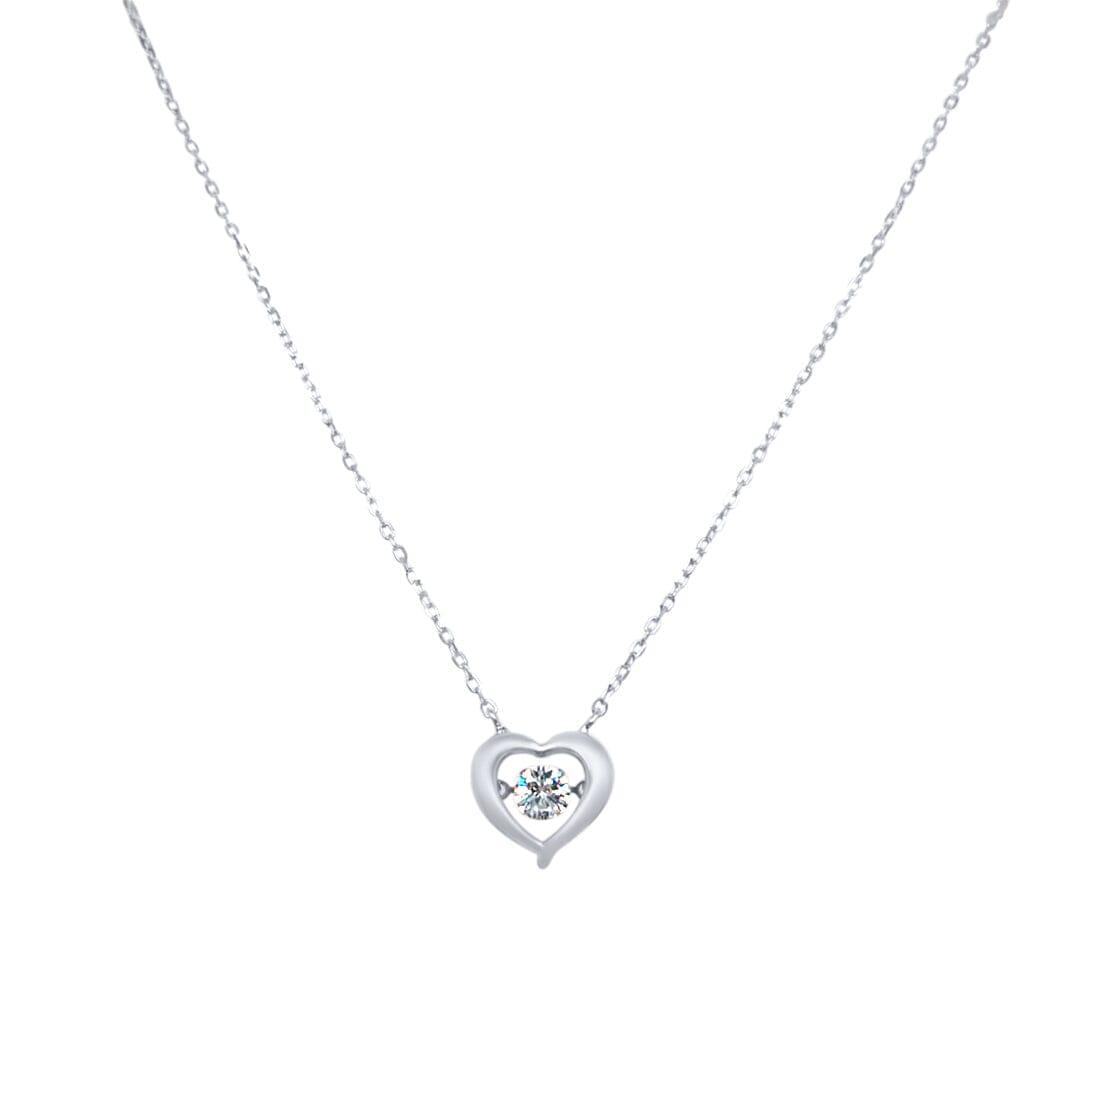 45cm Plain Open Heart Pendant Necklace with Cubic Zirconia in Sterling Silver Necklaces Bevilles 